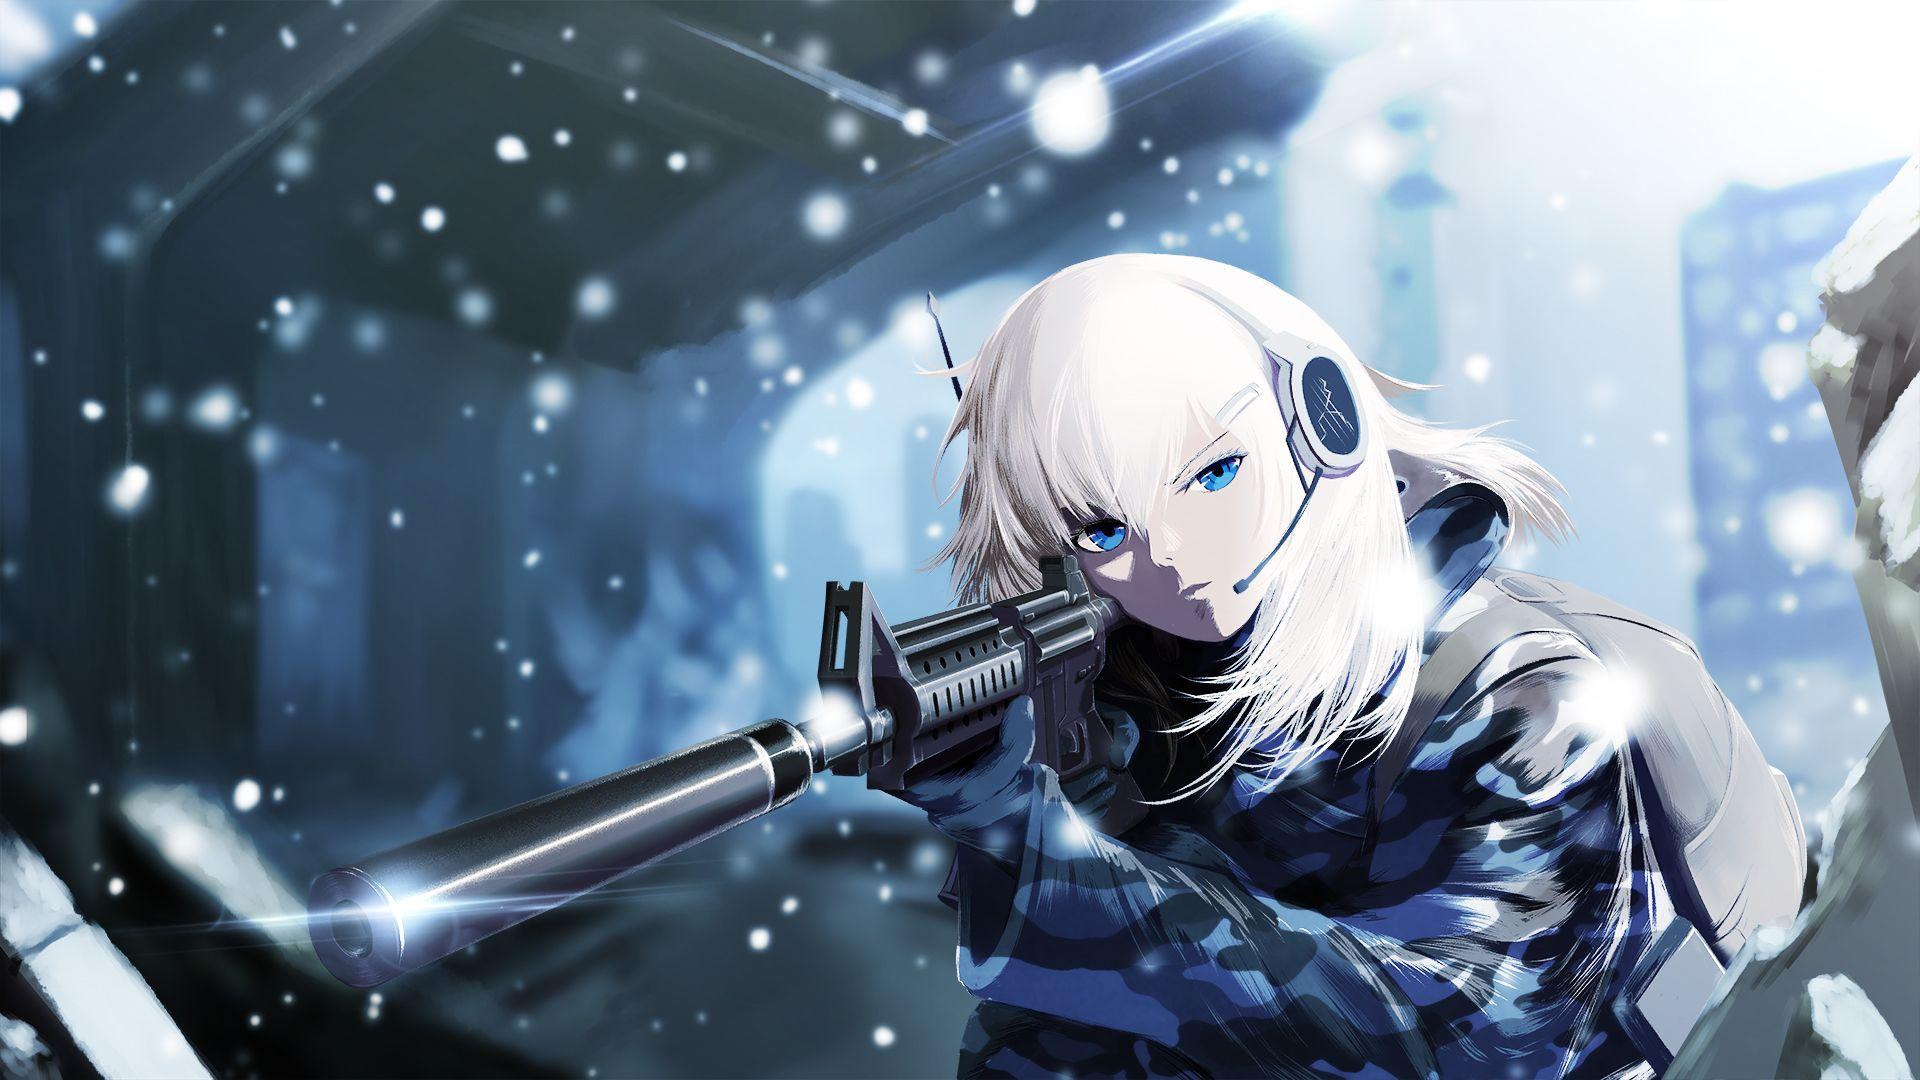 Anime Soldier Wallpaper Free Anime Soldier